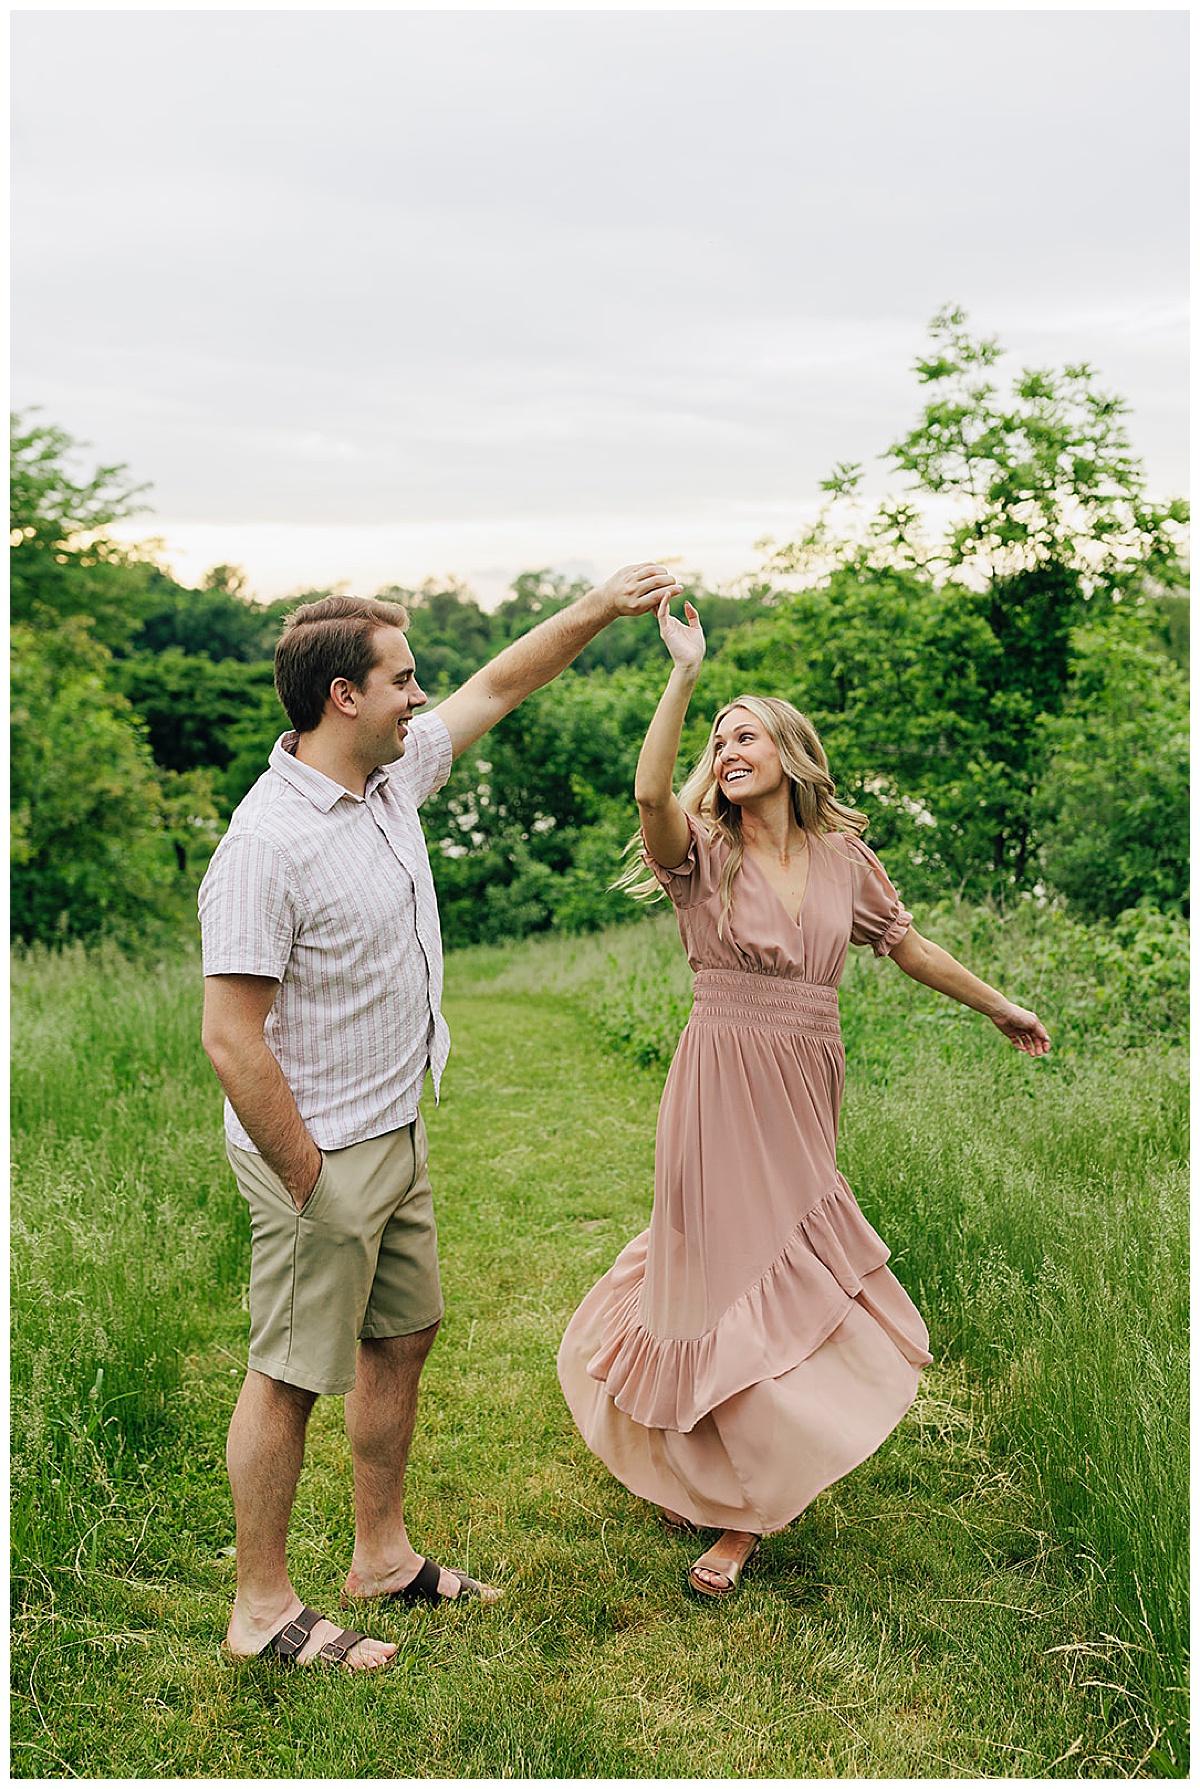 Adults dance in grass for Detroit wedding photographer